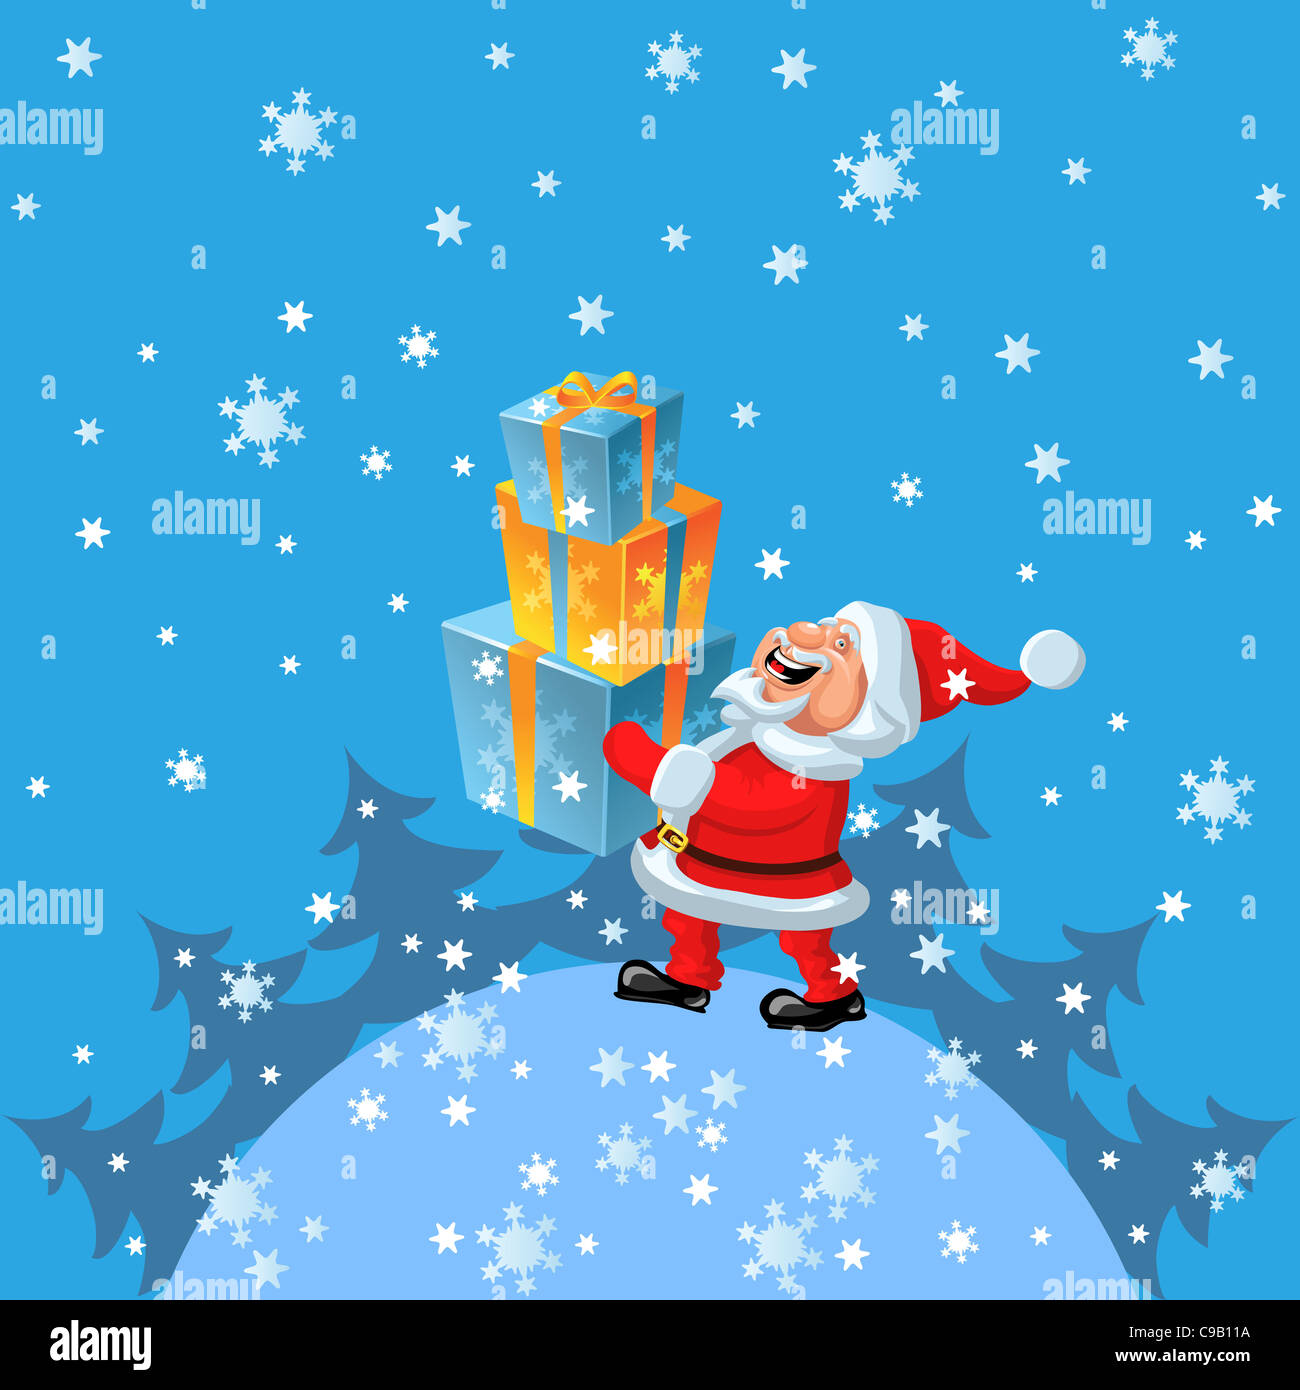 funny cartoon Santa Claus comes around the globe with gifts in hand Stock Photo